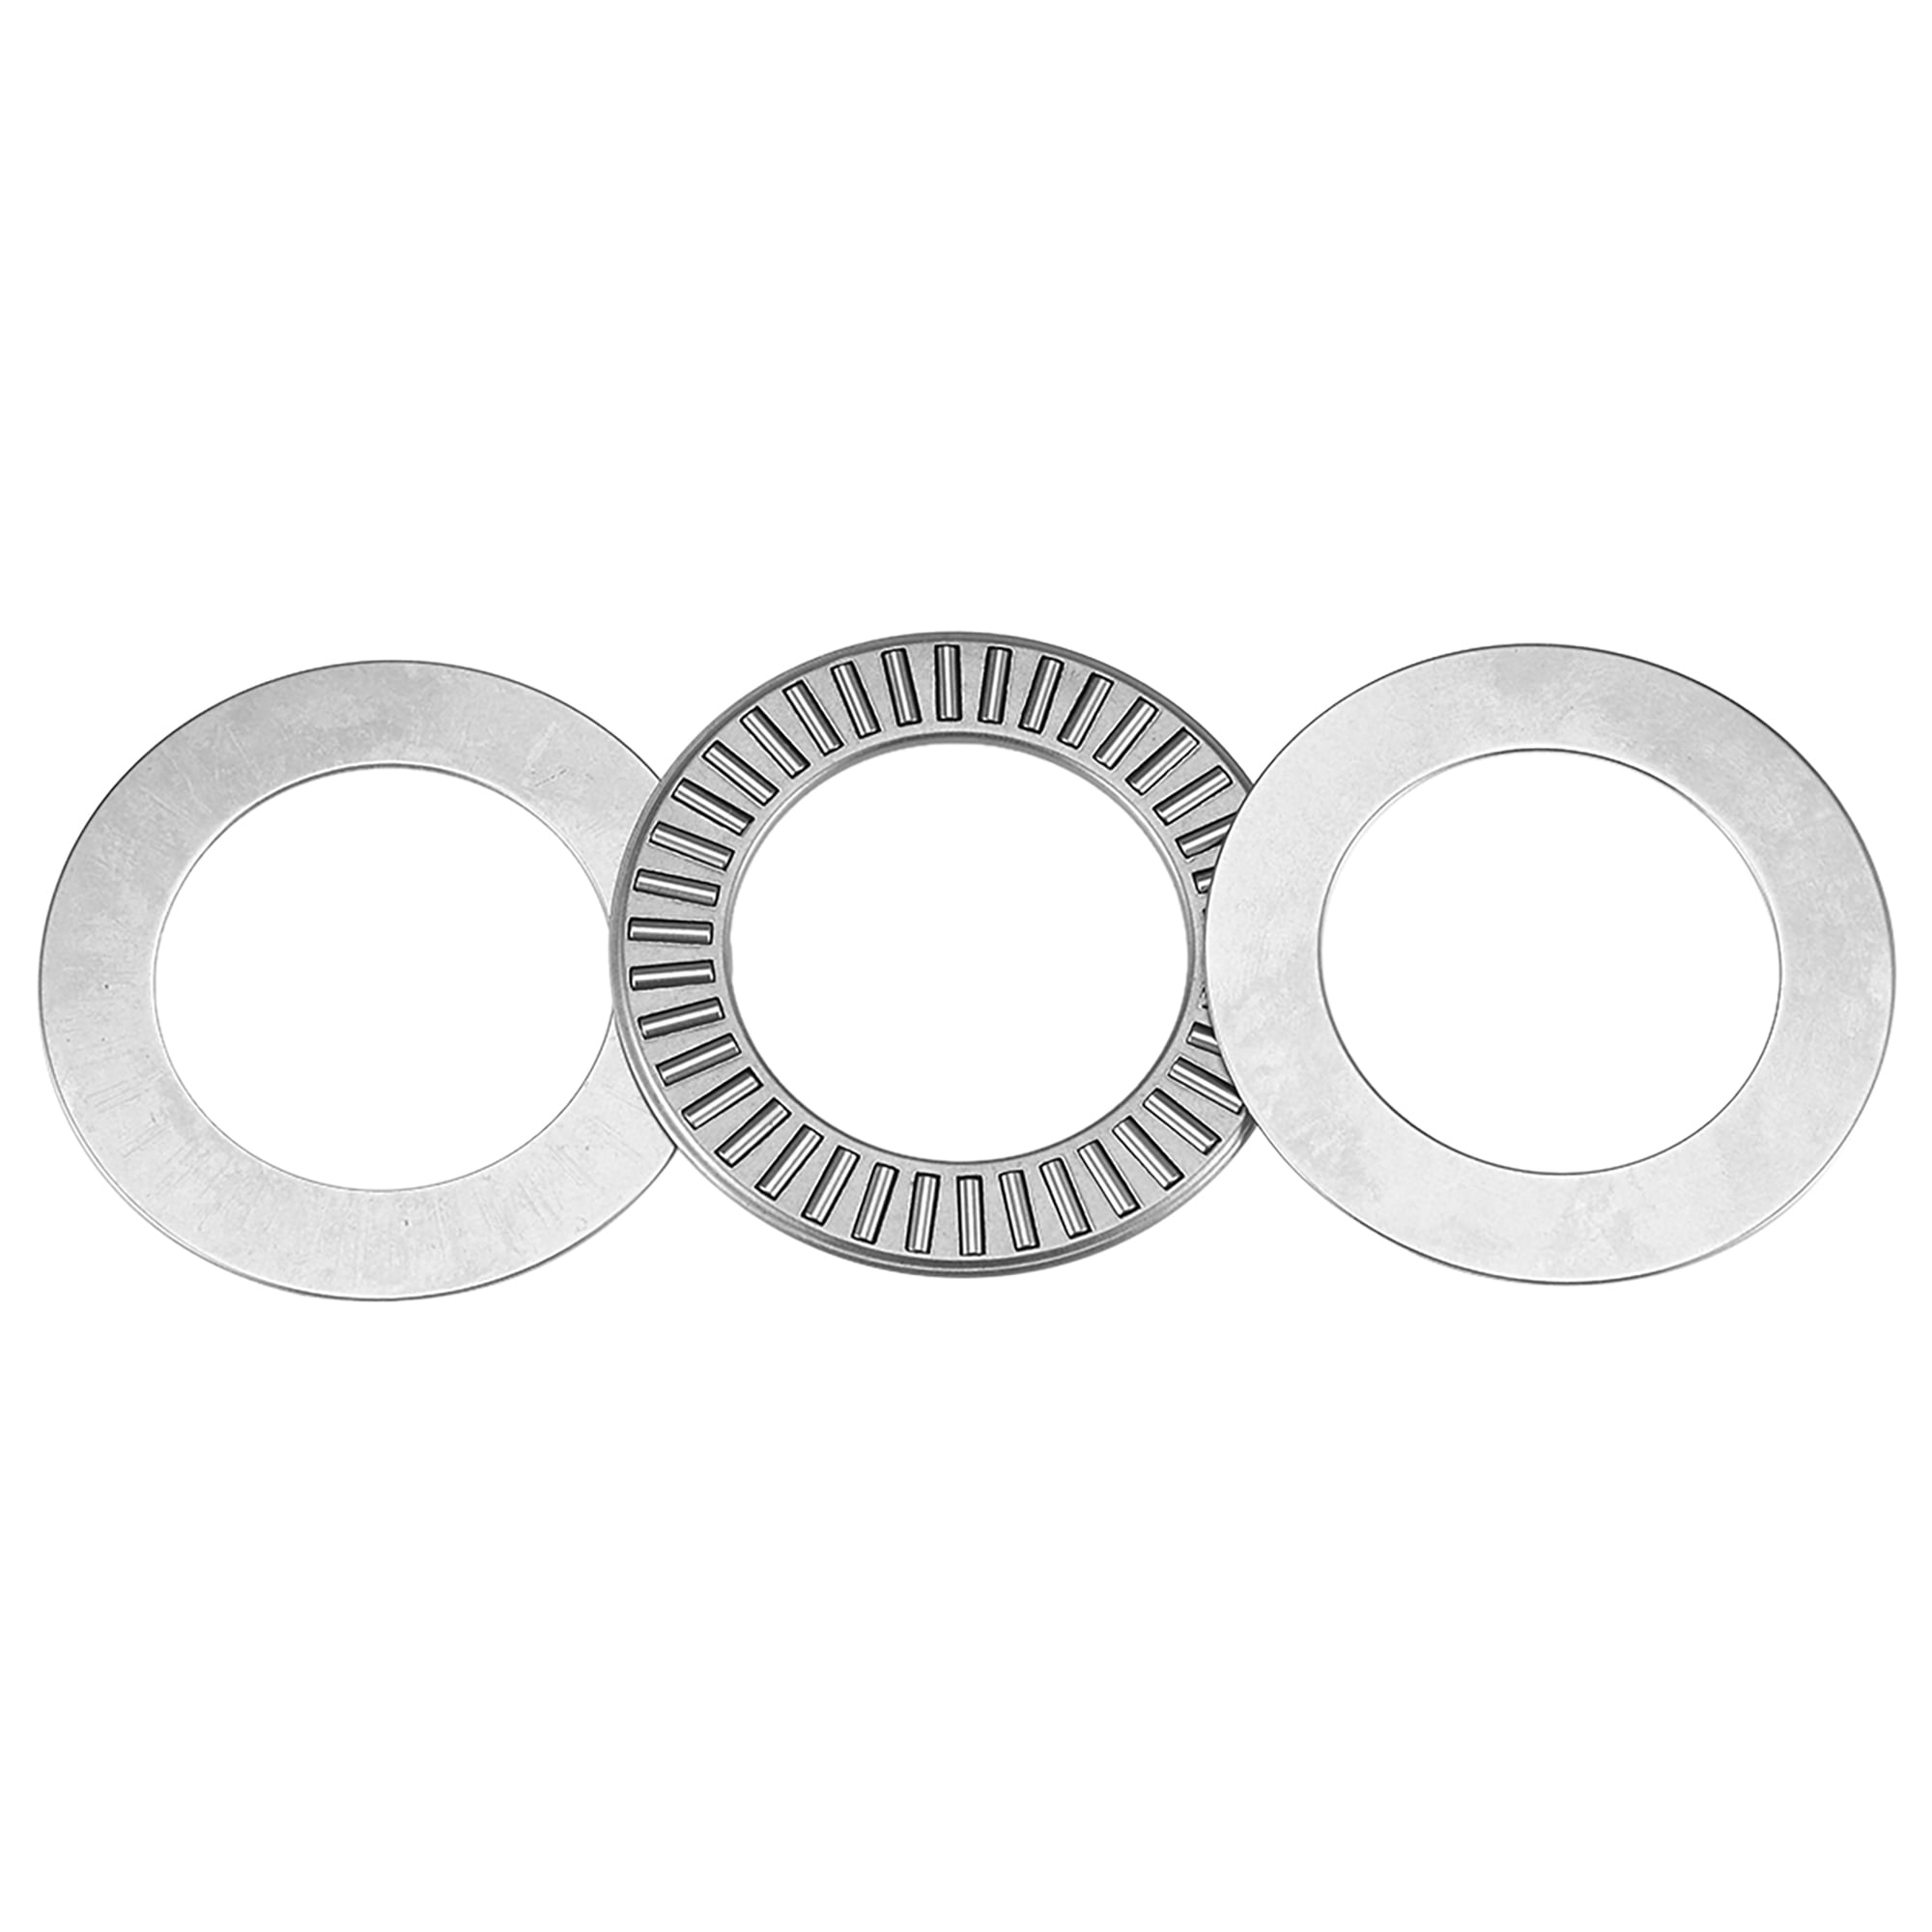 NTA2031 Thrust Needle Roller Bearings 1-1/4 x 1-29/32 x 5/64-inch with Washer